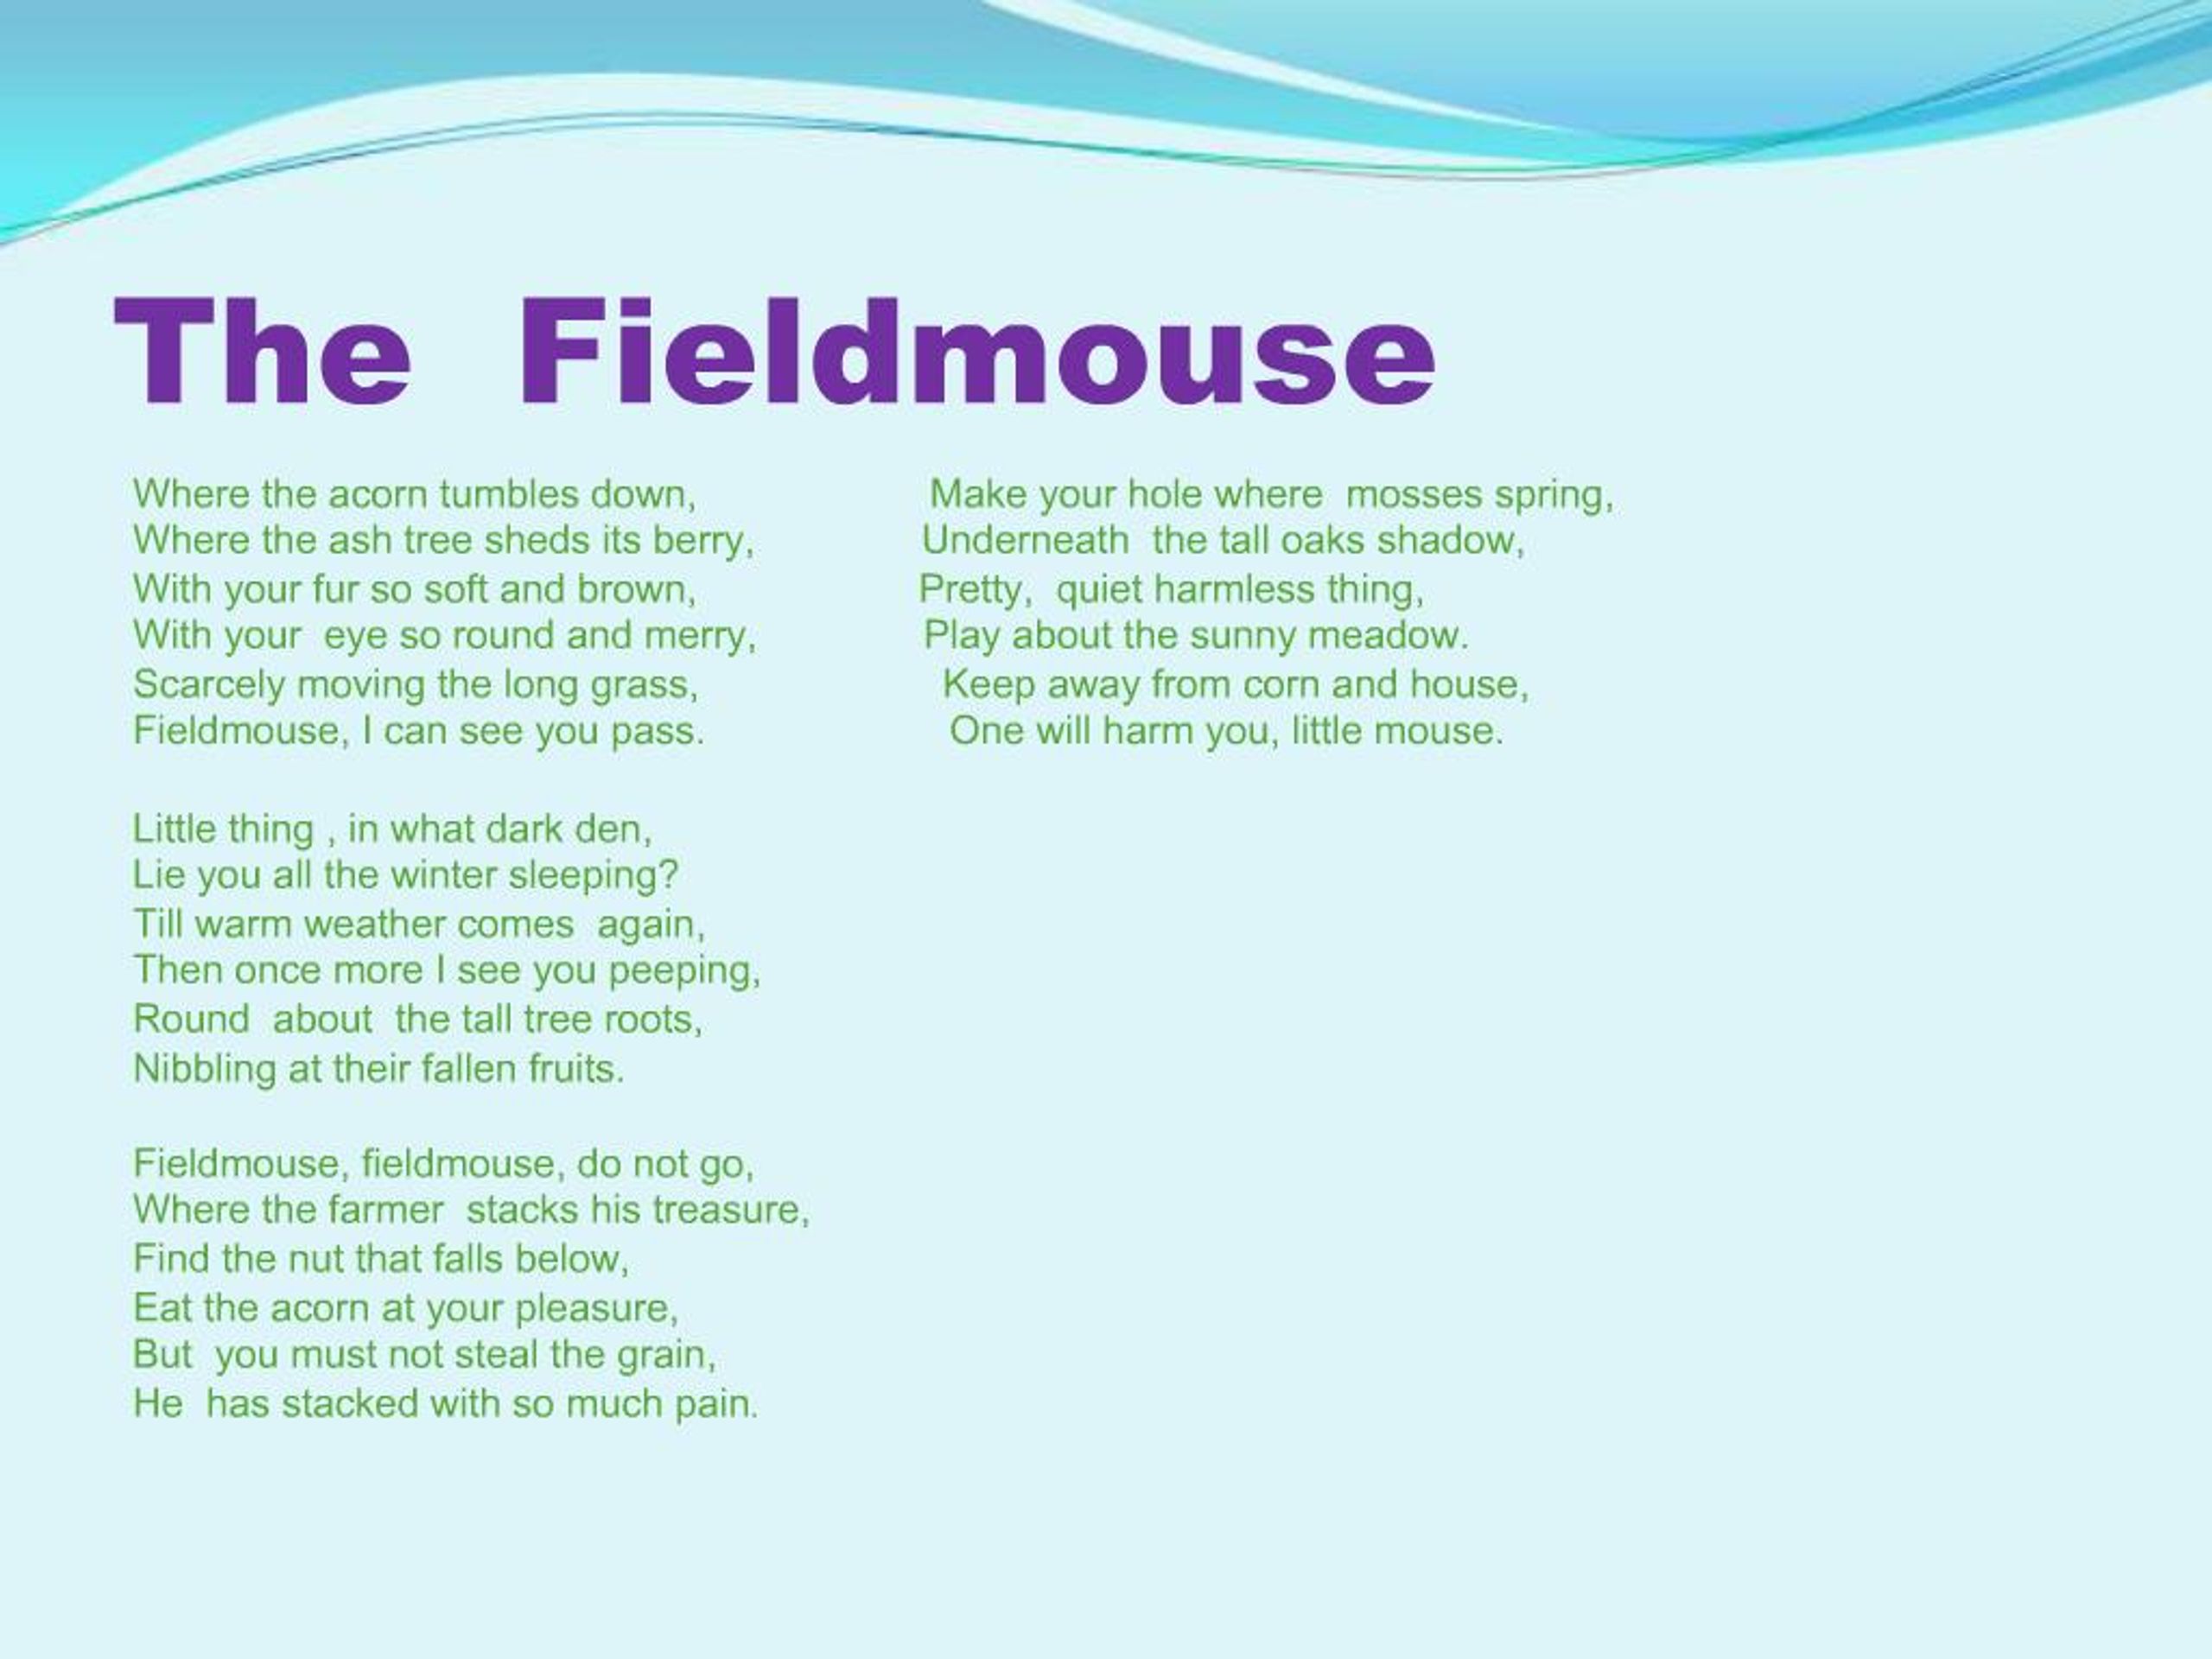 the field mouse poem by cecil frances alexander summary